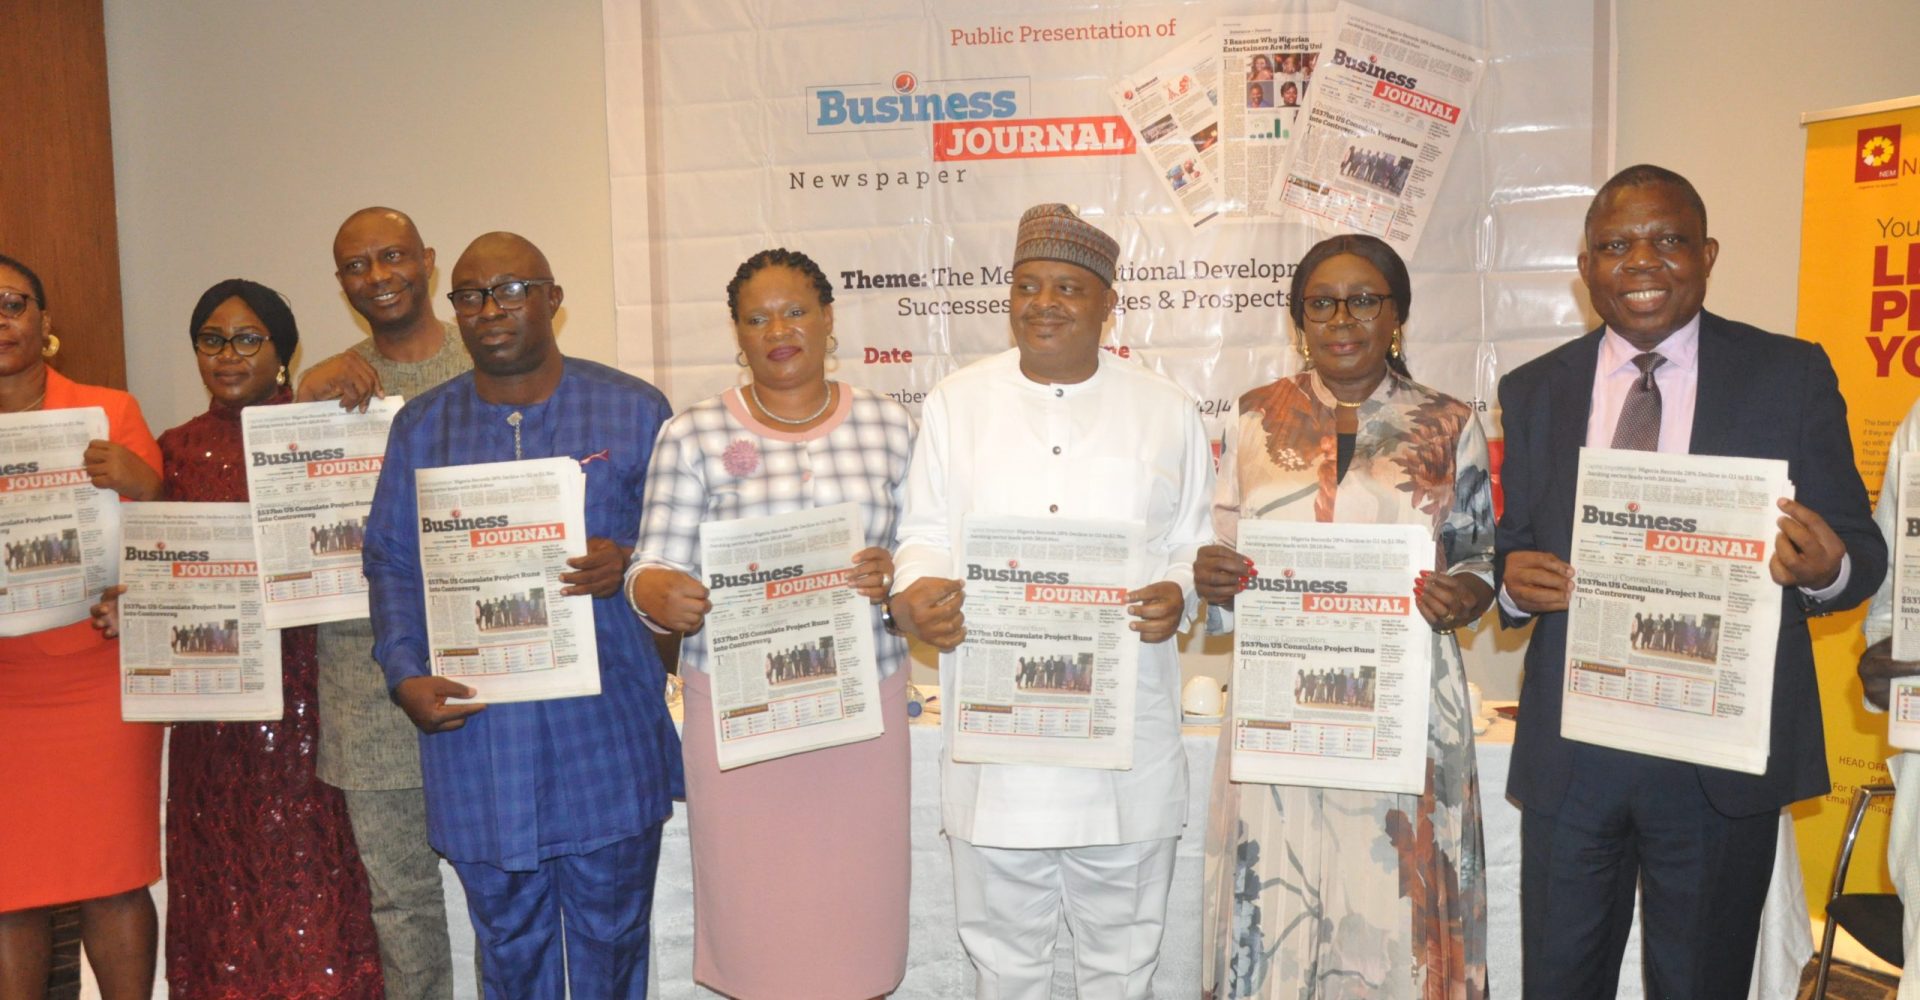 L-R: Maureen Chigbo, President, Guild of Corporate Online Publishers (GOCOP); Mrs. Adeola Olagoke, rep. Lagos State Commissioner for Information & Strategy; Dr. Biodun Adedipe; Prince Cookey, Publisher/Editor-in-Chief, Business Journal; his wife, Mrs. Perpetua Cookey; Mr. Rasaaq Salami, Dep. Director, rep. CFI/CEO of NAICOM; Mrs. Nnenna Ukoha, rep. EVC/CEO of NCC and Tim Akano, MD/CEO, New Horizons Limited at the official launch of Business Journal Newspaper in Lagos over the weekend.